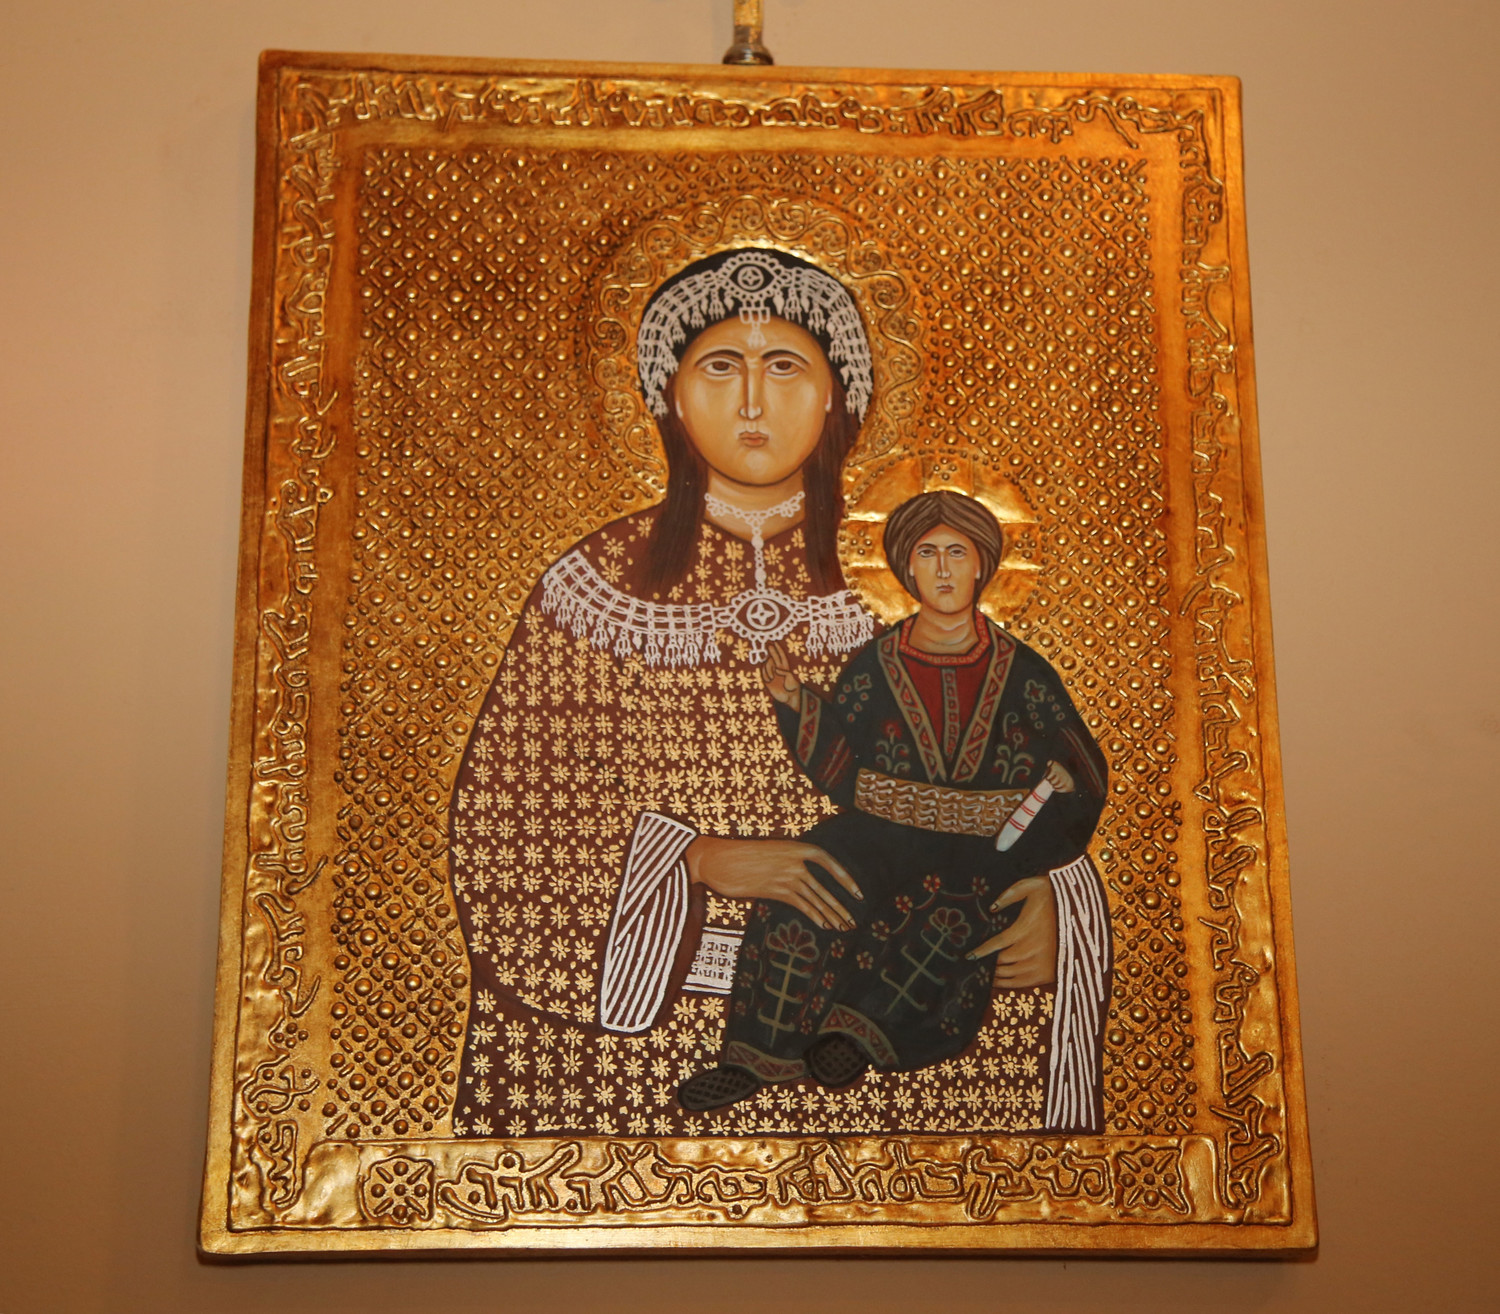 An icon of Our Lady of Aradin graces St. Michael’s Church in Manhattan.